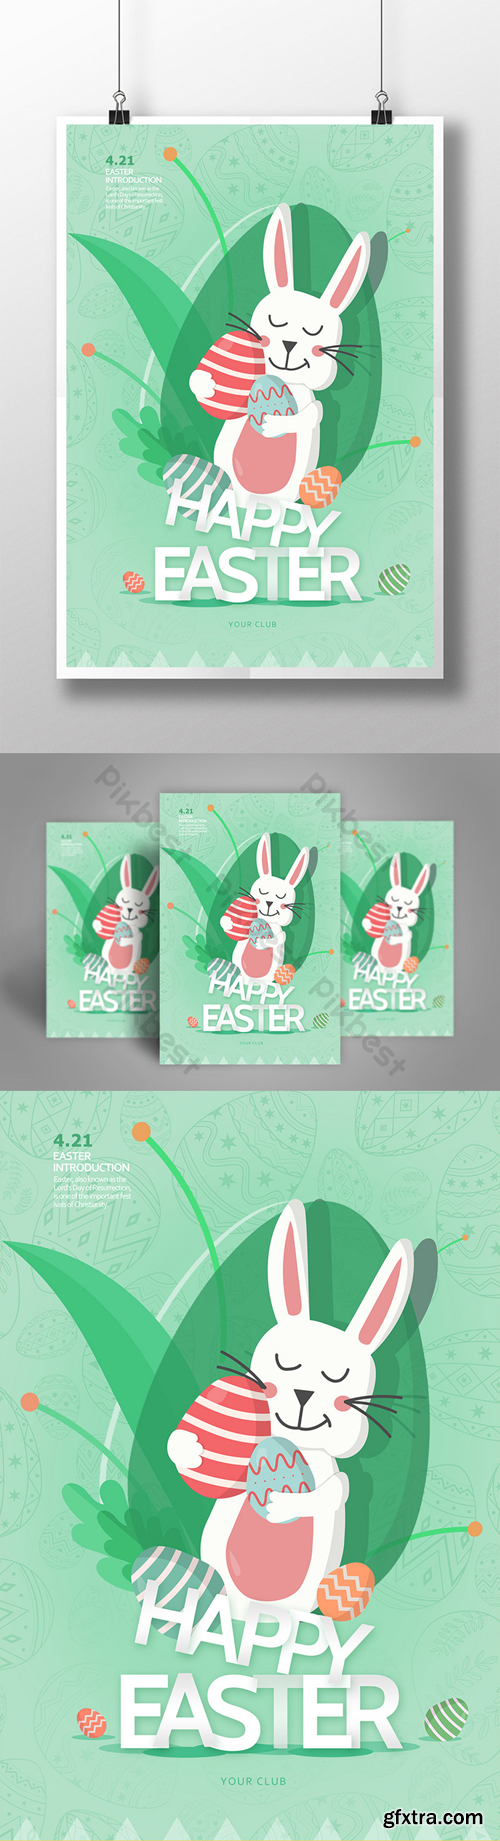 Green Happy Easter Poster Template PSD